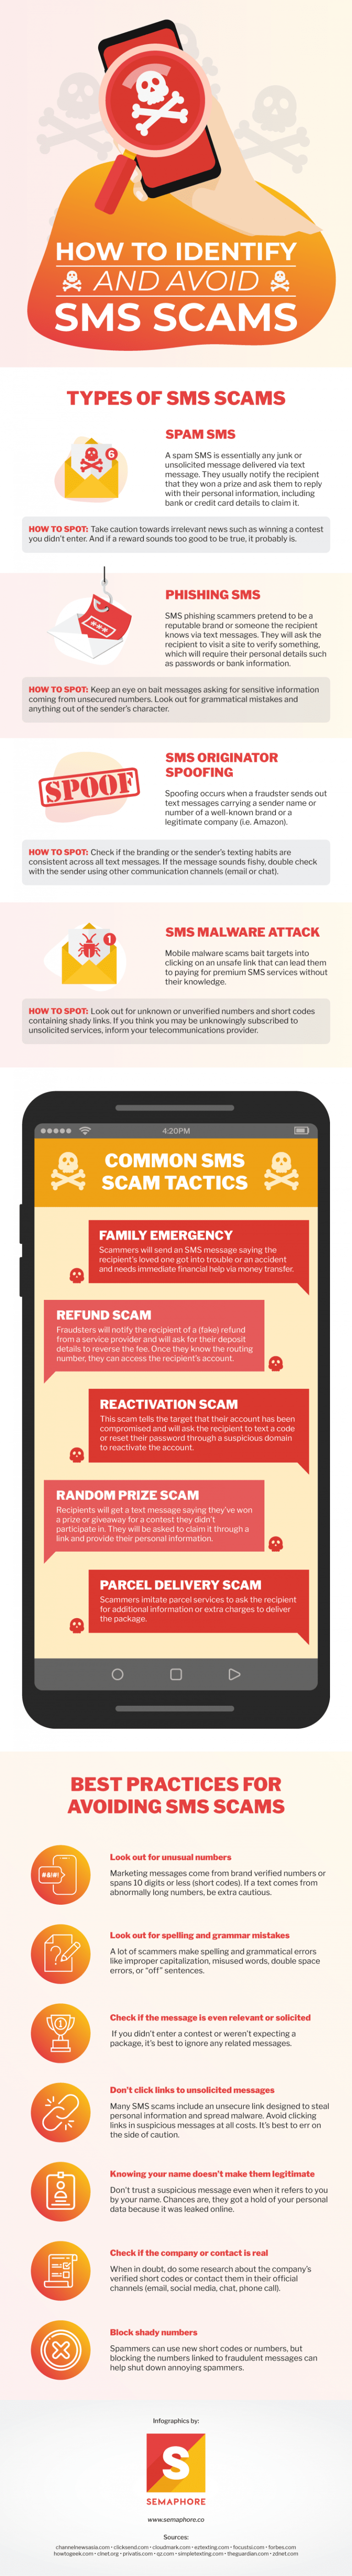 how-to-avoid-sms-scams-768x5618-min.png